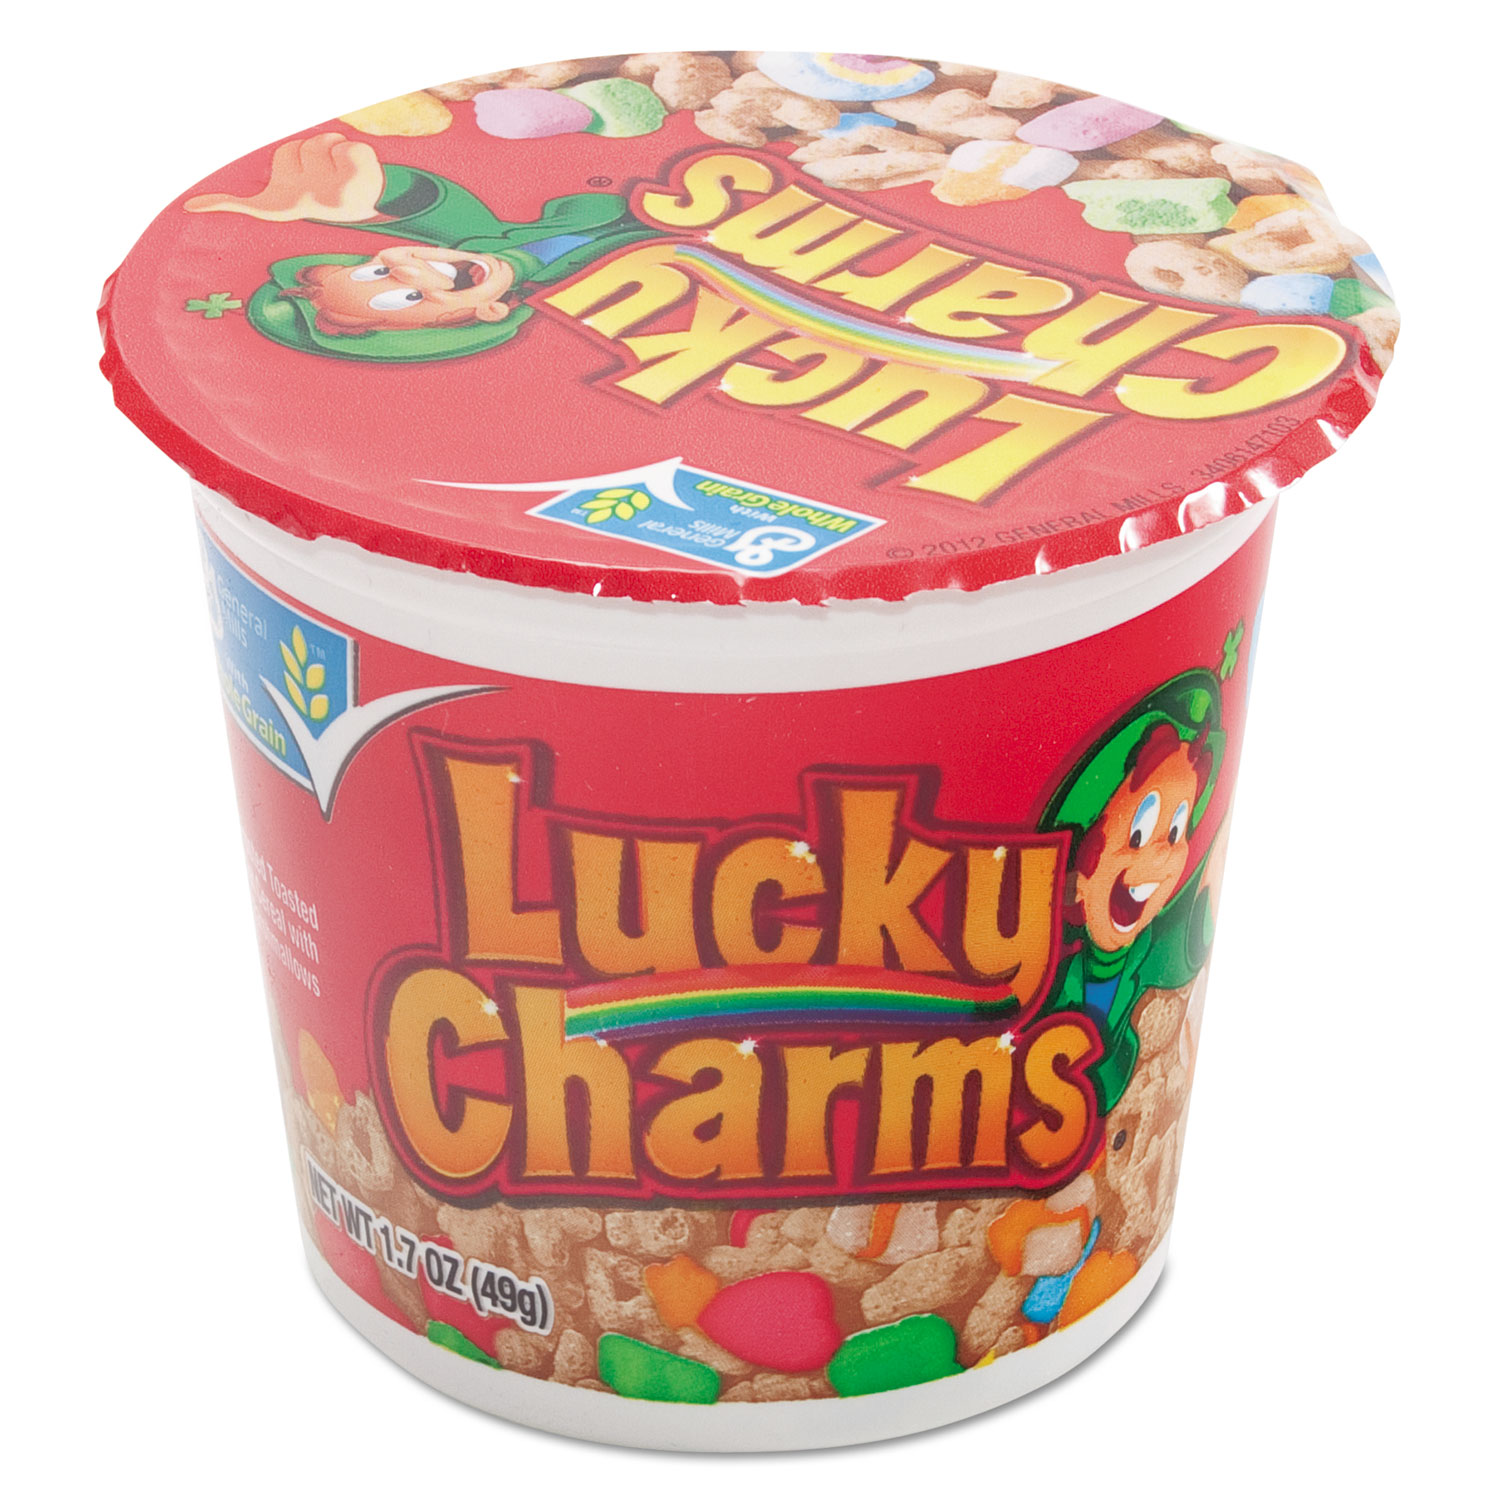  General Mills GEM13899 Lucky Charms Cereal, Single-Serve 1.73oz Cup, 6/Pack (AVTSN13899) 